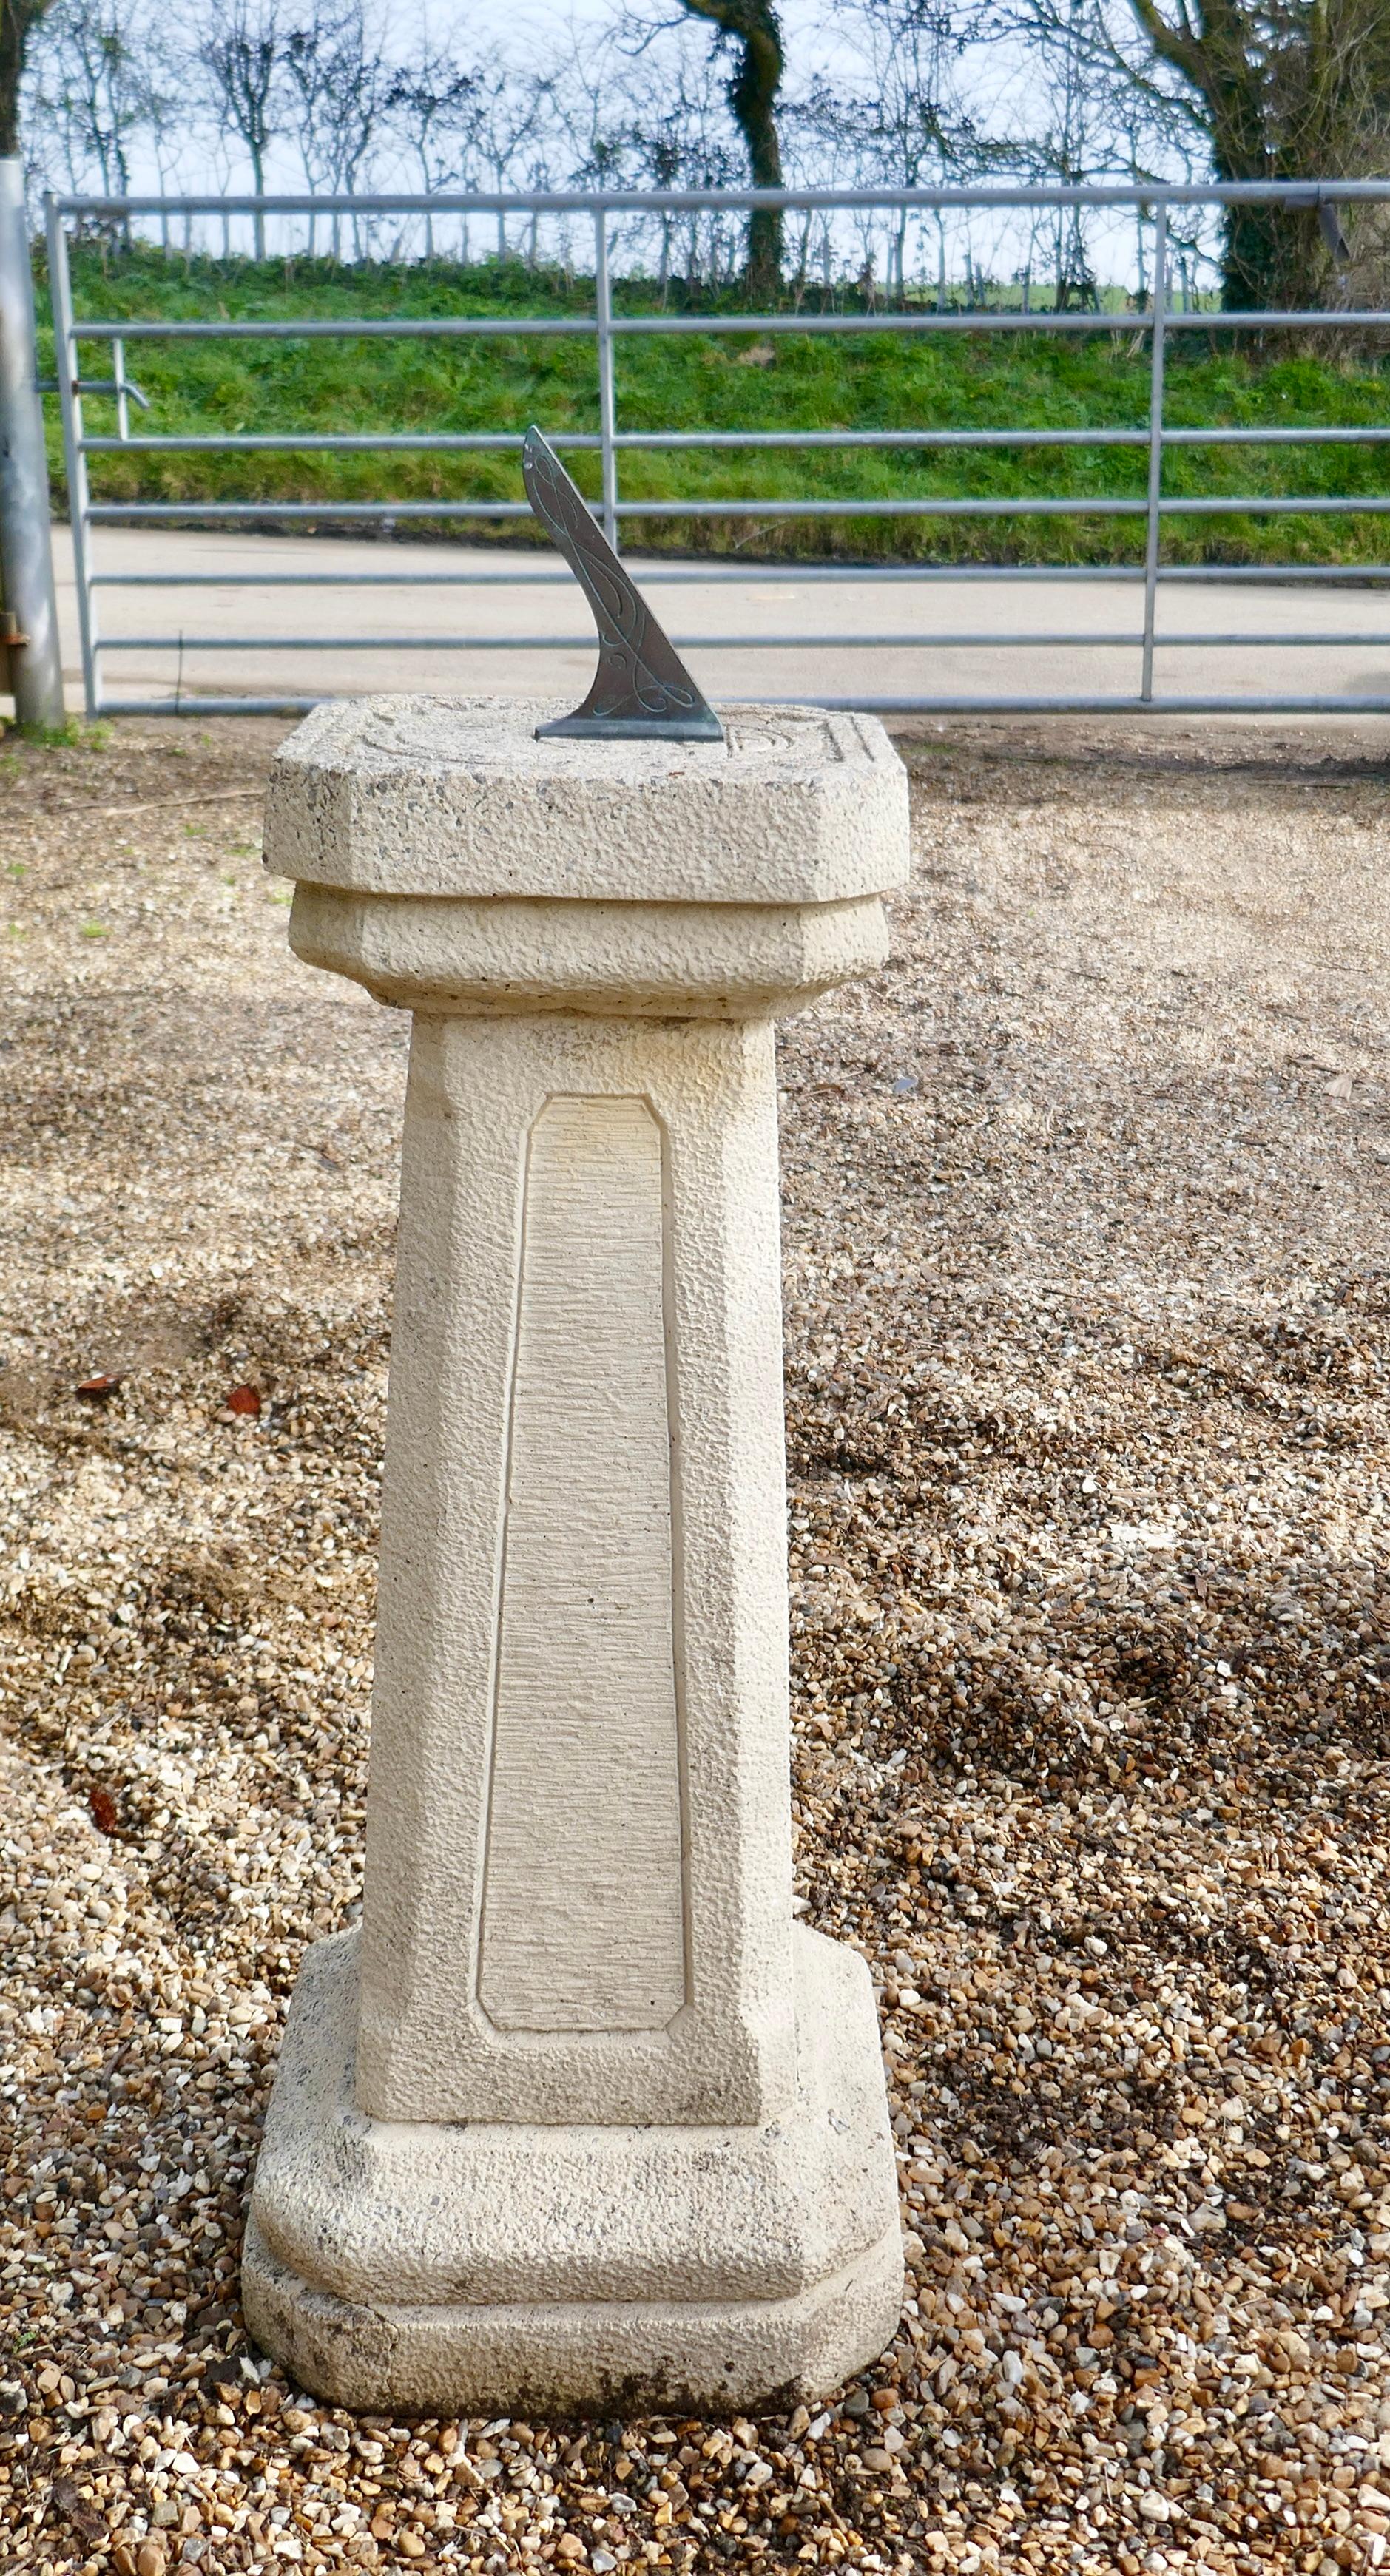 Weathered garden sundial

This sundial base is made in a cast composite with flint chippings
The pedestal is rectangular and the sundial is made in bronze
A very attractive piece with its own unique character
The sundial is 38” tall and 14”